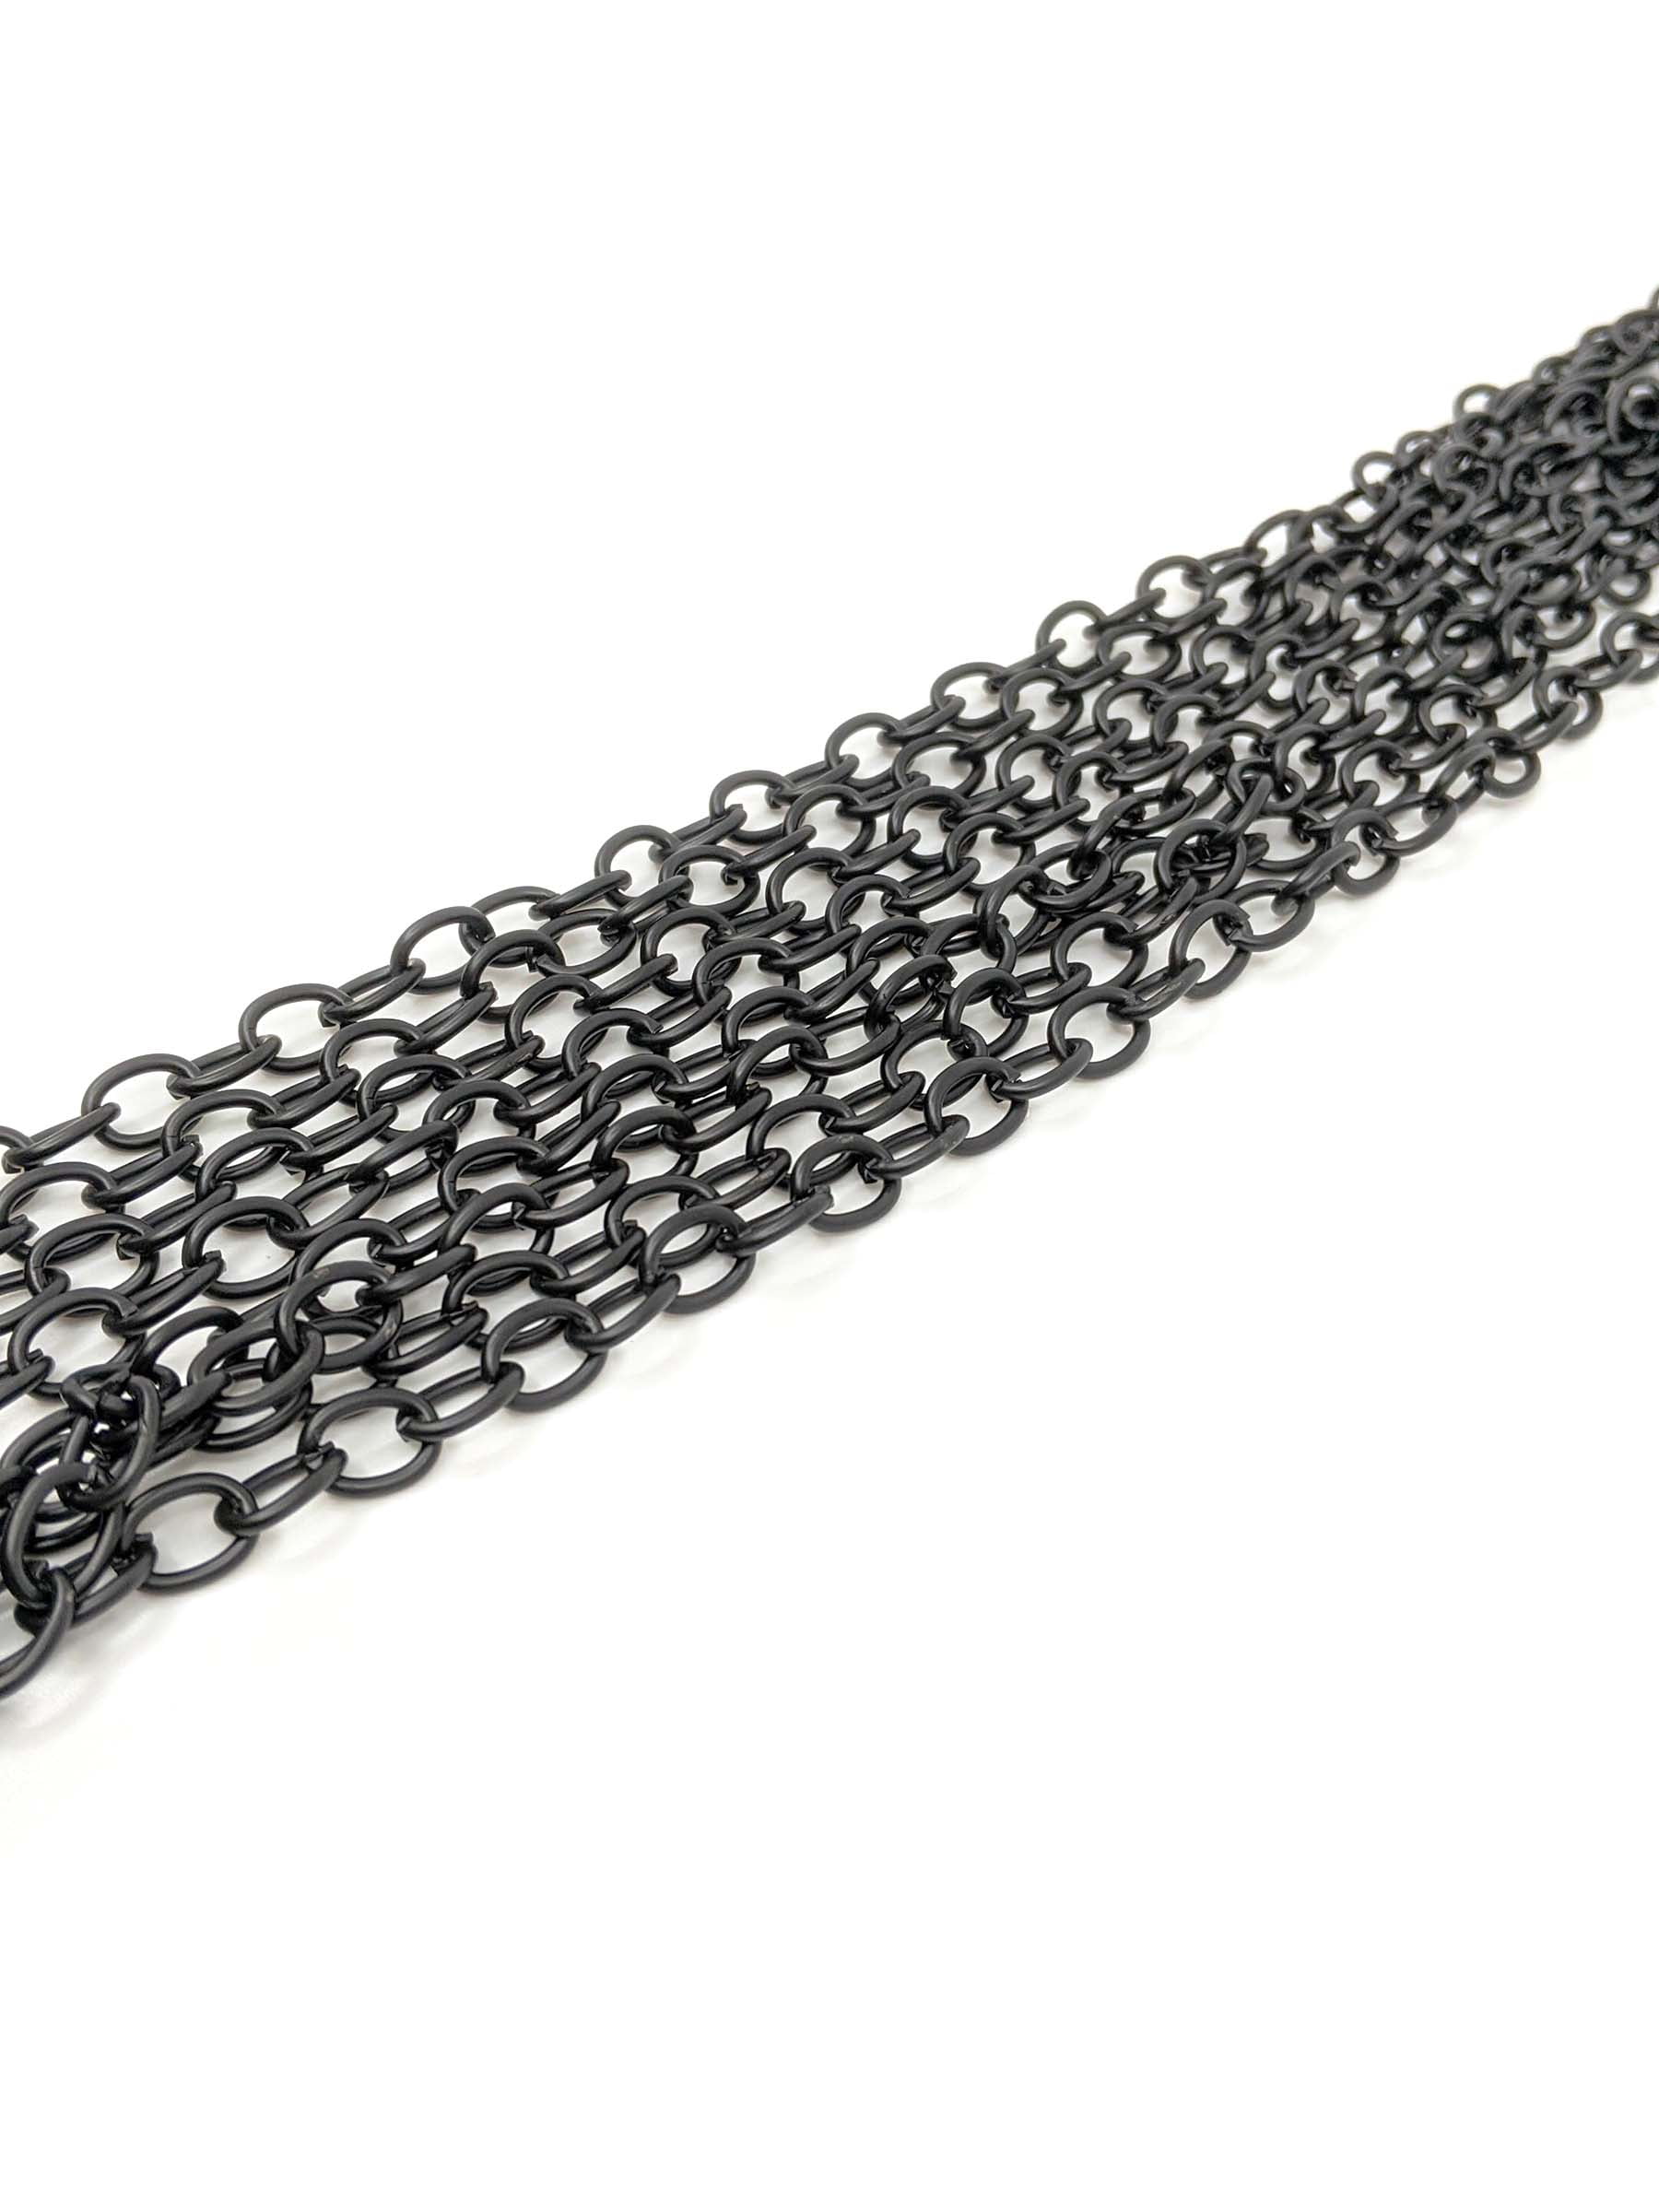 Blue Moon Beads Silver Metal Oval Cable Chain for Jewelry Making, 100 inches